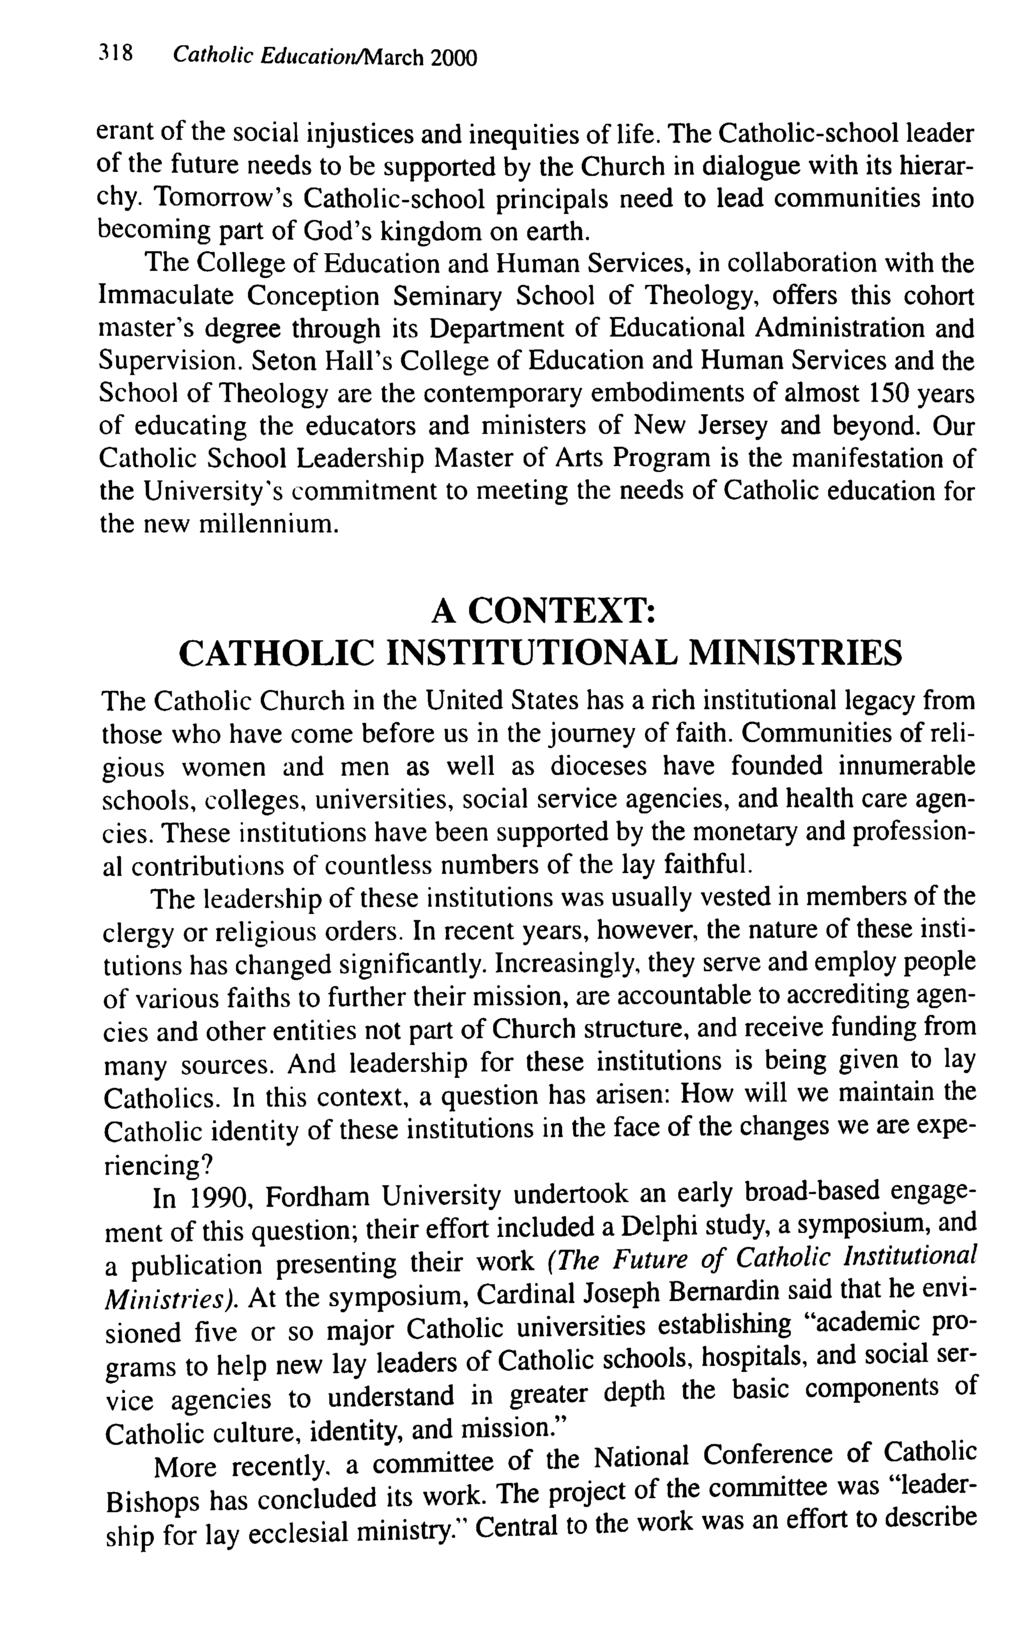 318 Catholic EducationAAarch 2000 erant of the social injustices and inequities of life. The Catholic-school leader of the future needs to be supported by the Church in dialogue with its hierarchy.